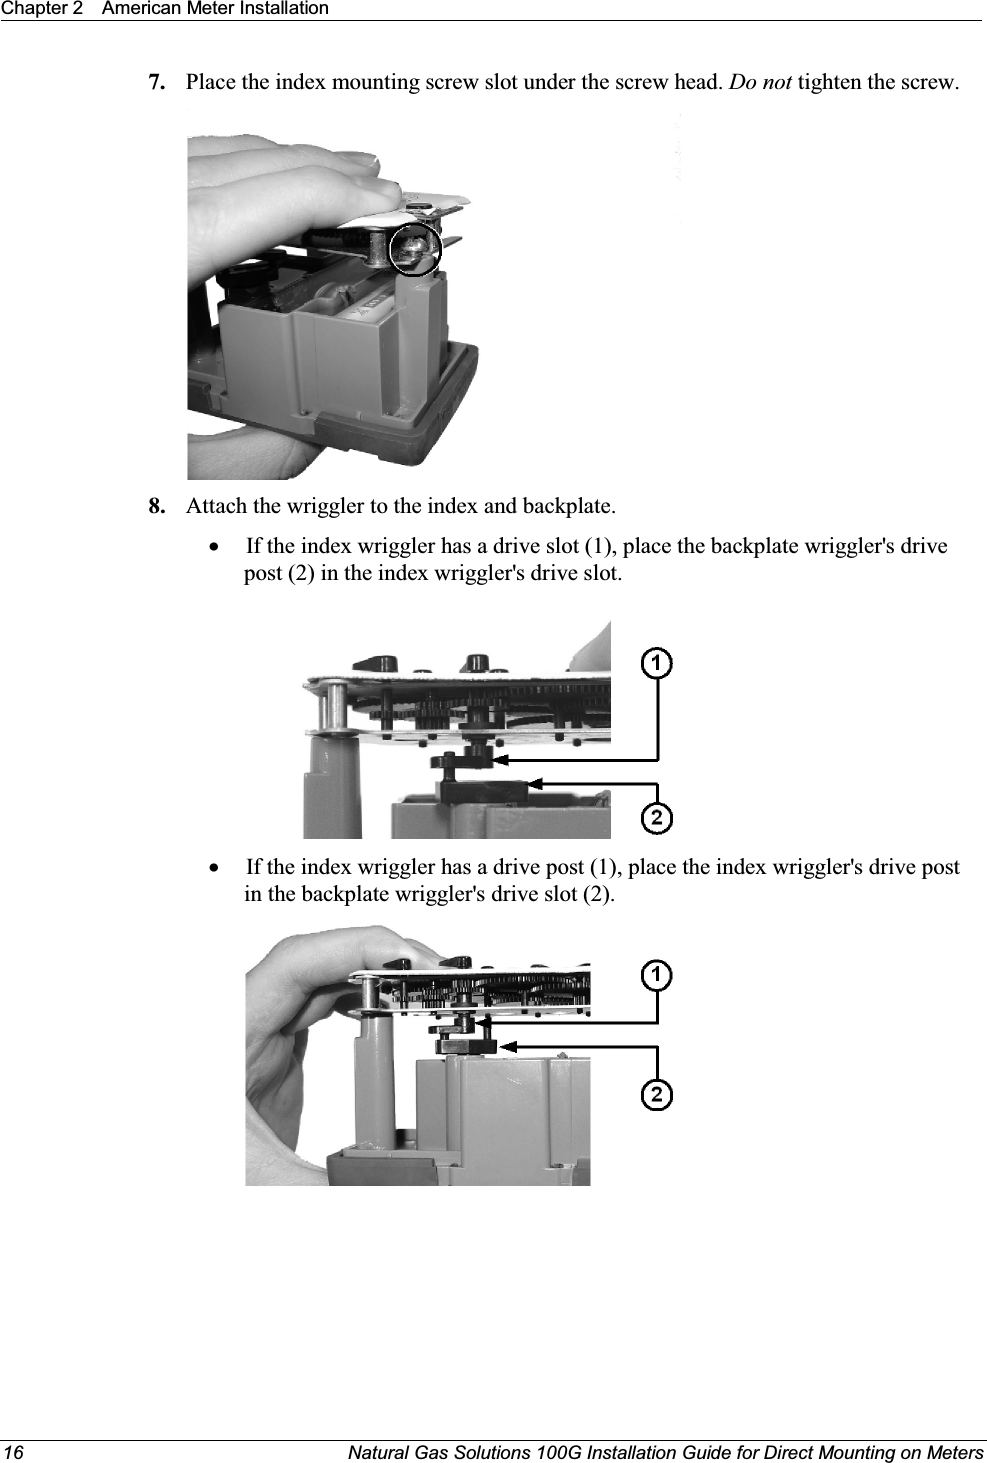 Chapter 2 American Meter Installation16 Natural Gas Solutions 100G Installation Guide for Direct Mounting on Meters7. Place the index mounting screw slot under the screw head. Do not tighten the screw.8. Attach the wriggler to the index and backplate. xIf the index wriggler has a drive slot (1), place the backplate wriggler&apos;s drive post (2) in the index wriggler&apos;s drive slot. xIf the index wriggler has a drive post (1), place the index wriggler&apos;s drive post in the backplate wriggler&apos;s drive slot (2).